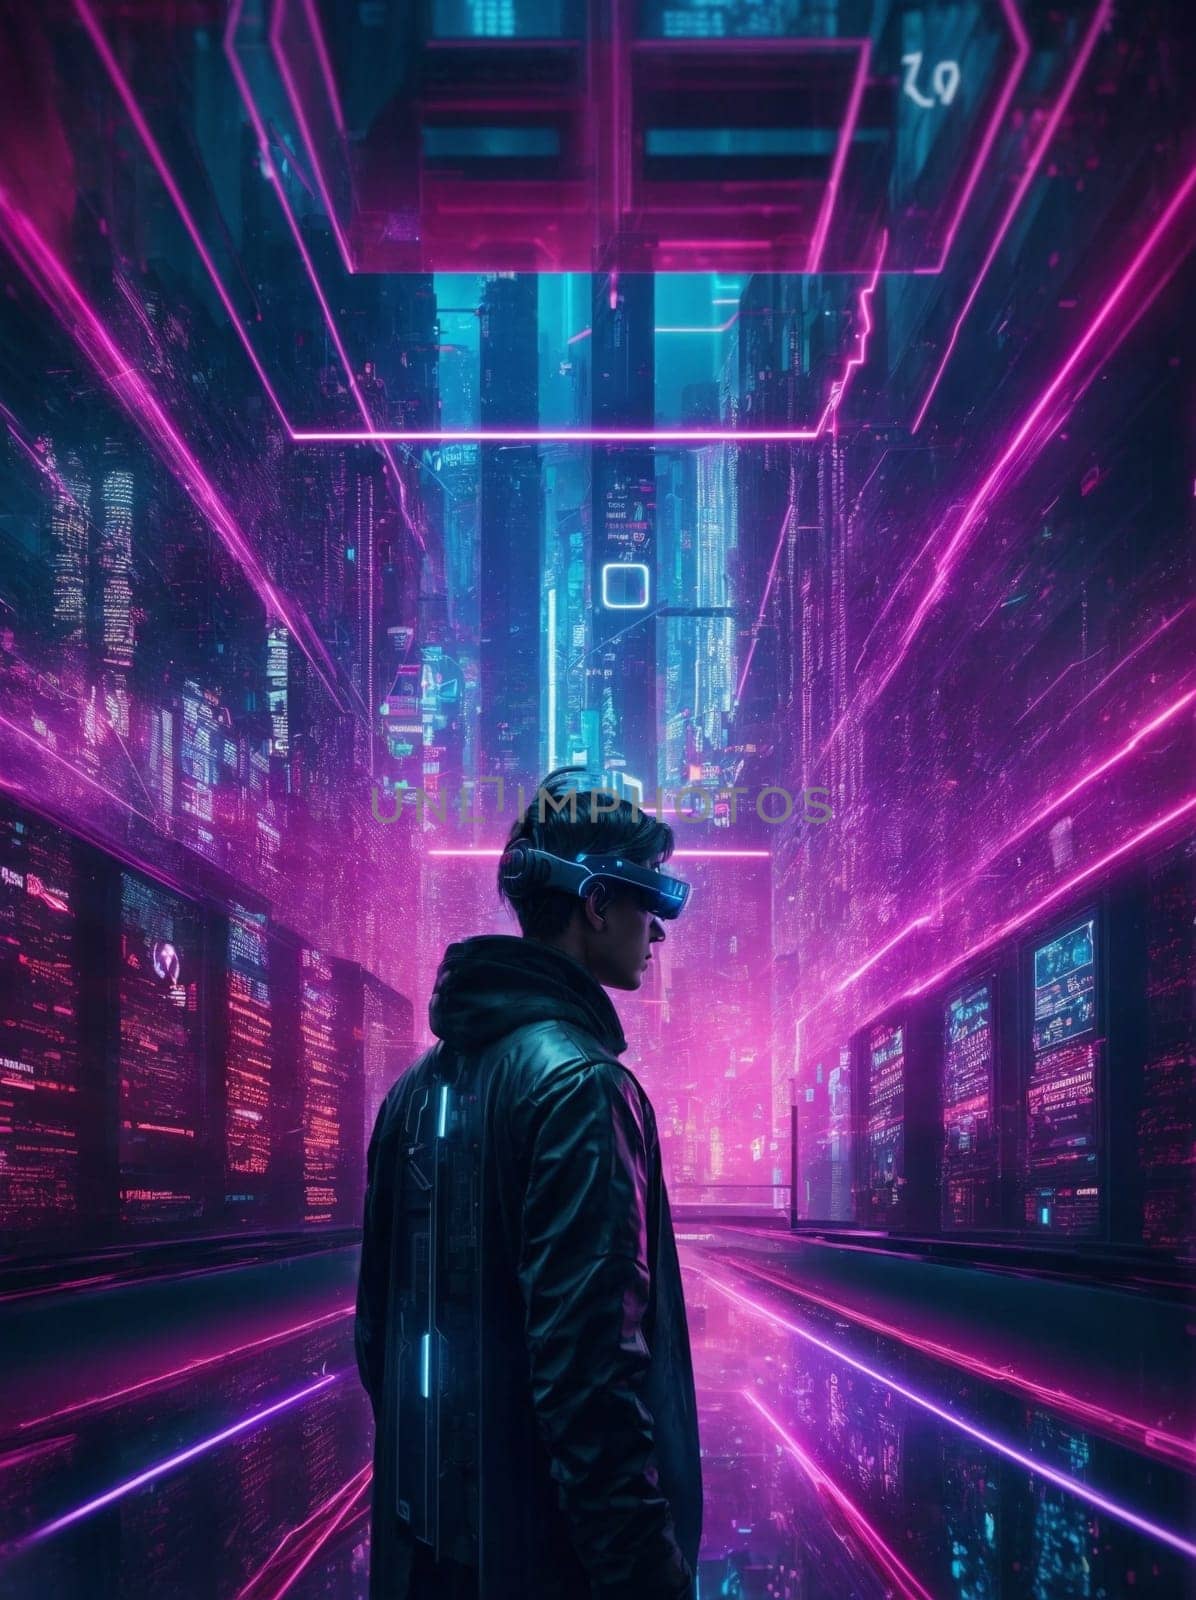 An urban scene of a man standing confidently in a tunnel illuminated by vibrant neon lights.